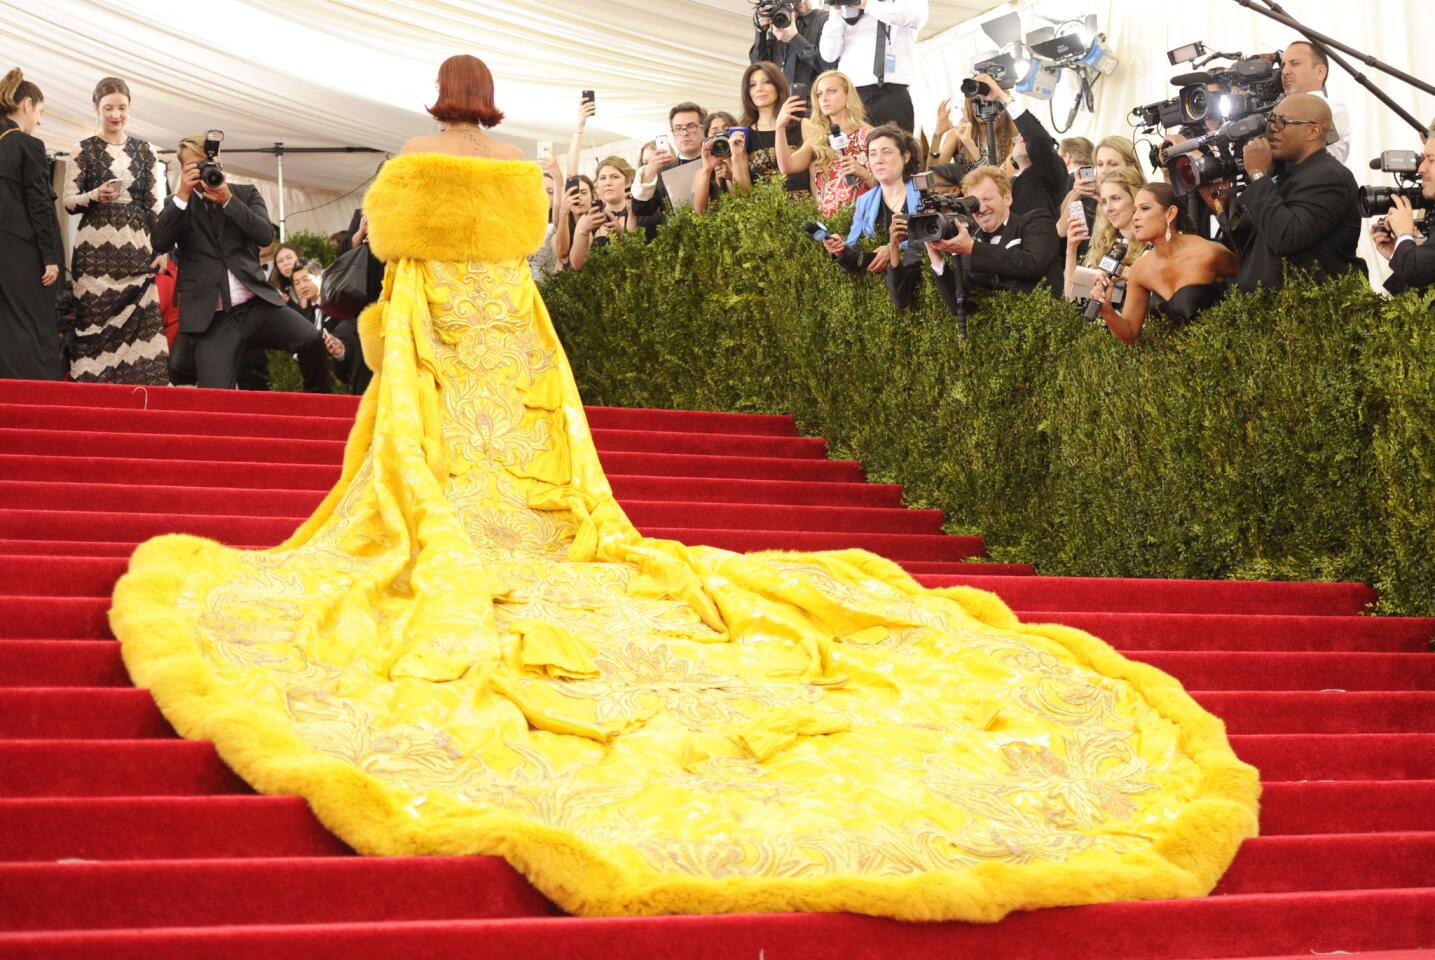 Rihanna's yellow fur-trimmed, embroidered cape makes a lasting impression on the red carpet at the Met Gala in New York on Monday evening.